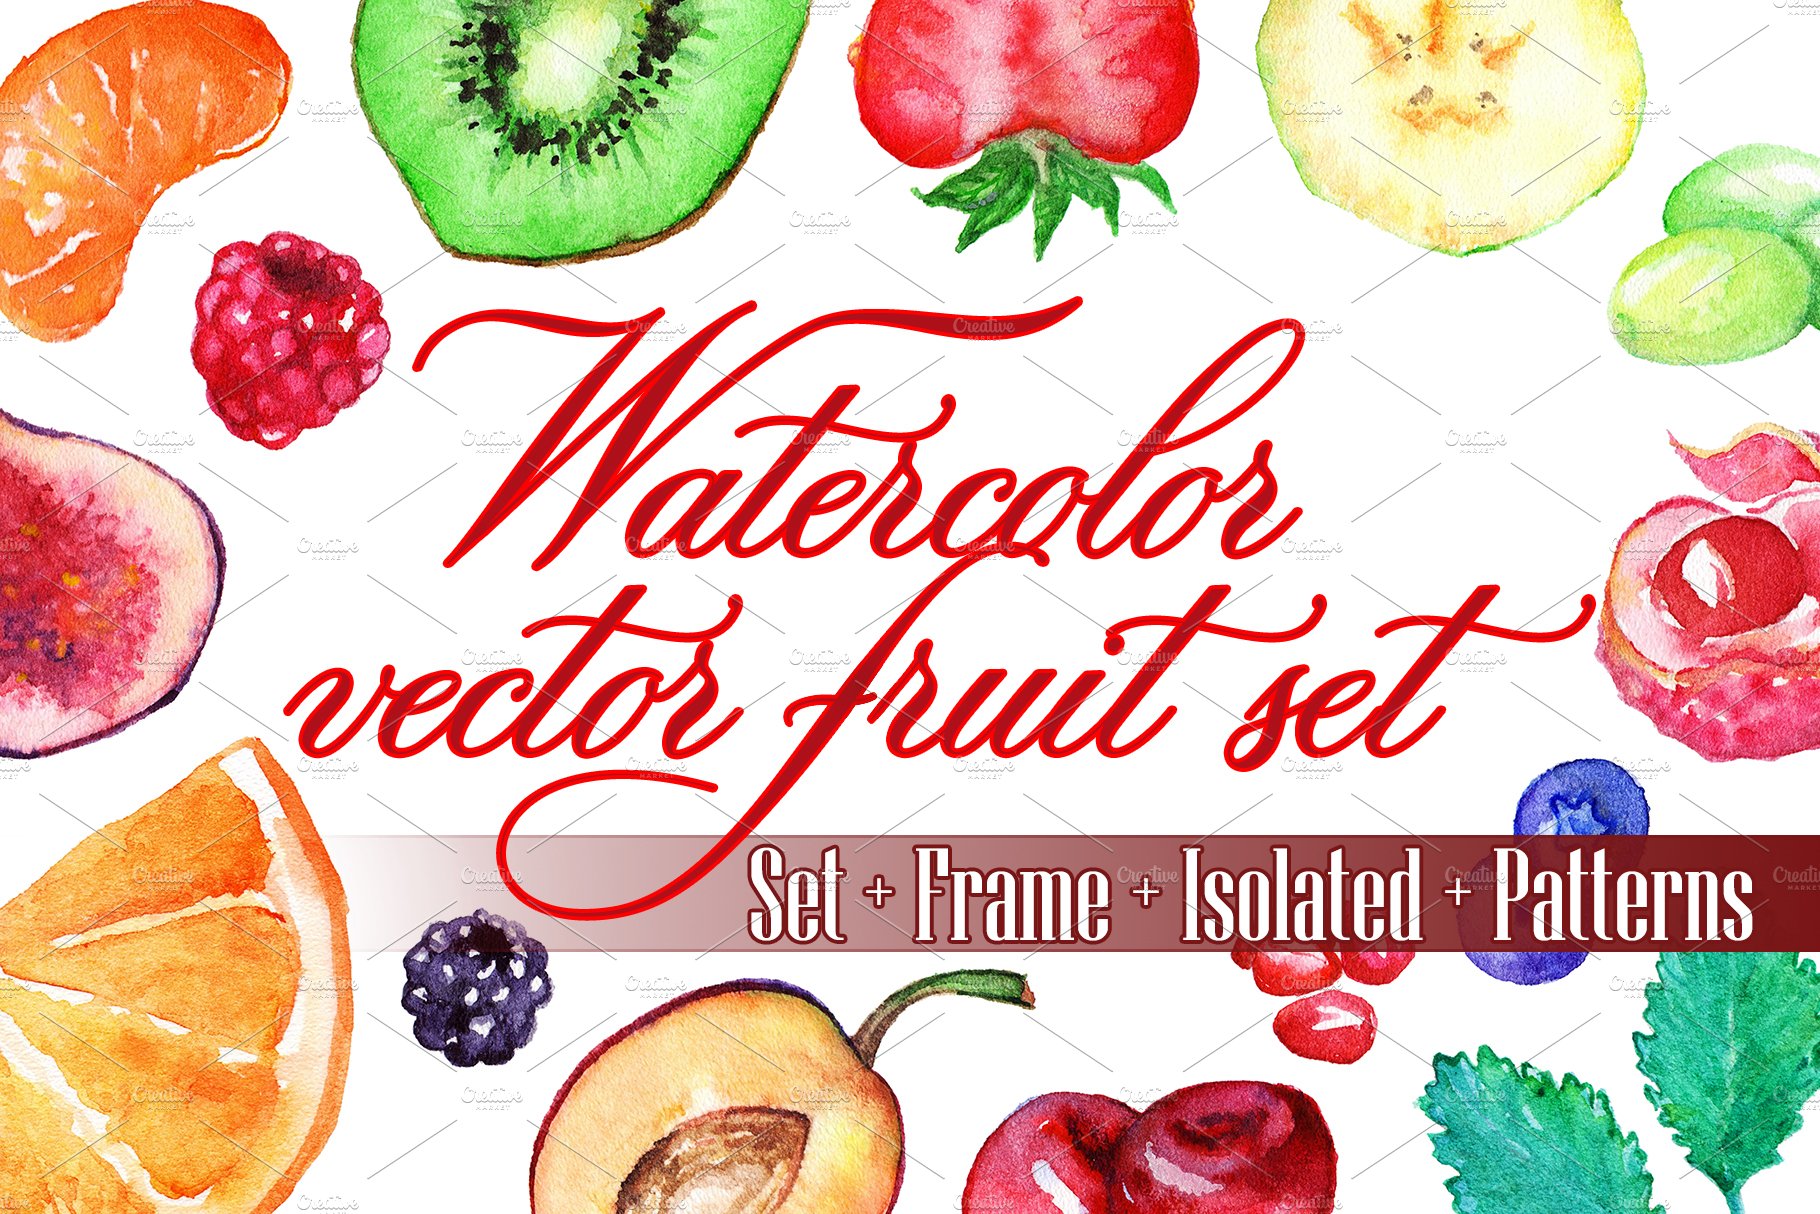 Watercolor fruit & berry set vector cover image.